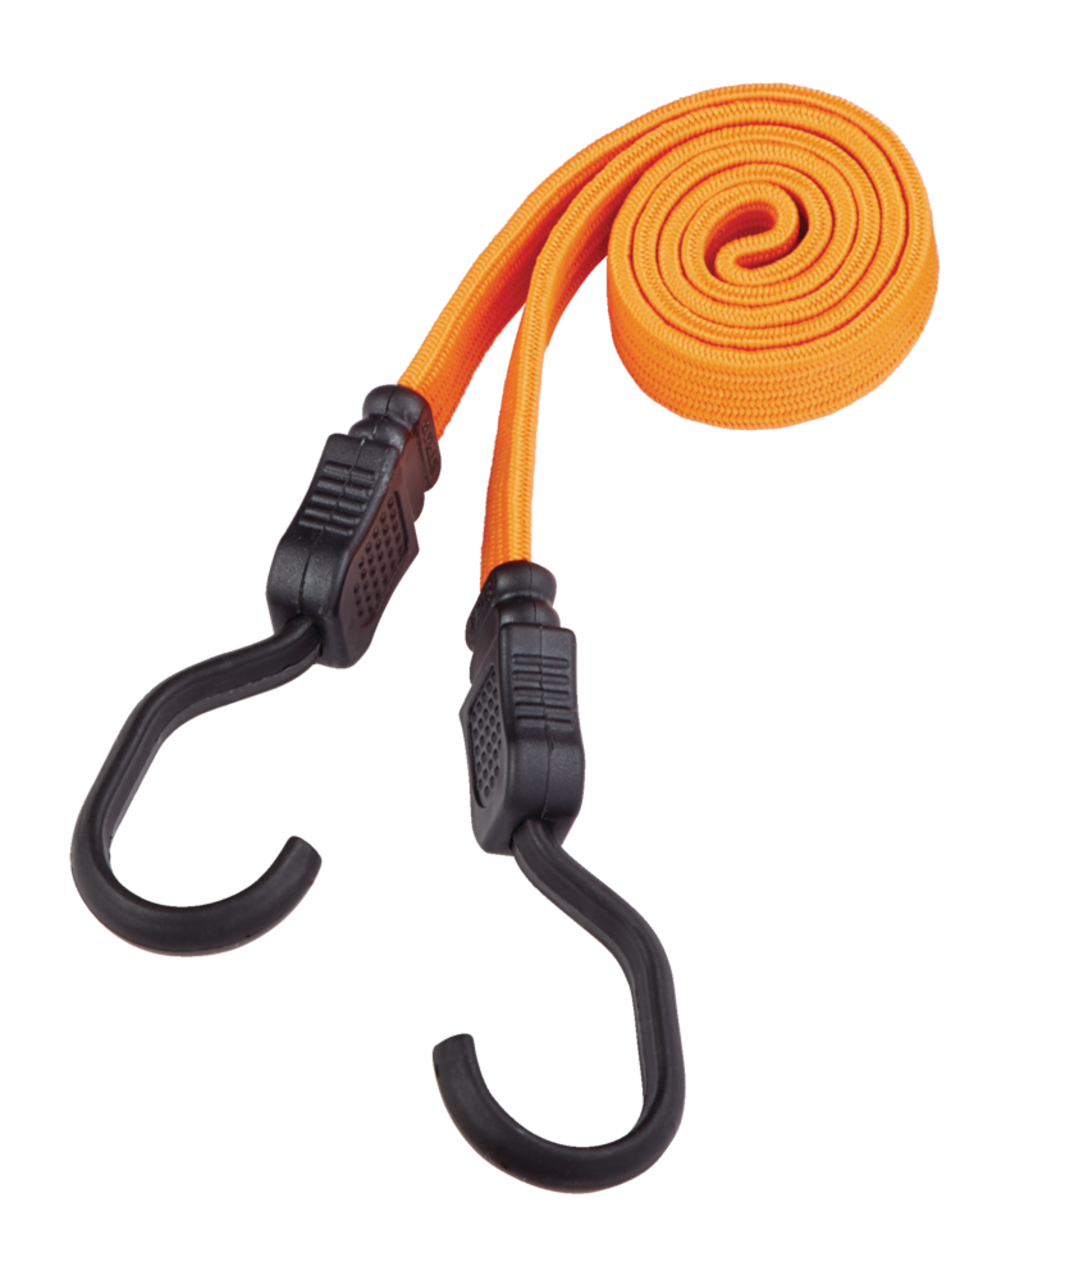 https://media-www.canadiantire.ca/product/automotive/automotive-outdoor-adventure/tarps-cords/0403073/36in-flat-strap-bungee-2pk-6f9e643a-06d5-4dc3-bb15-68ca5ab020b3.png?imdensity=1&imwidth=640&impolicy=mZoom